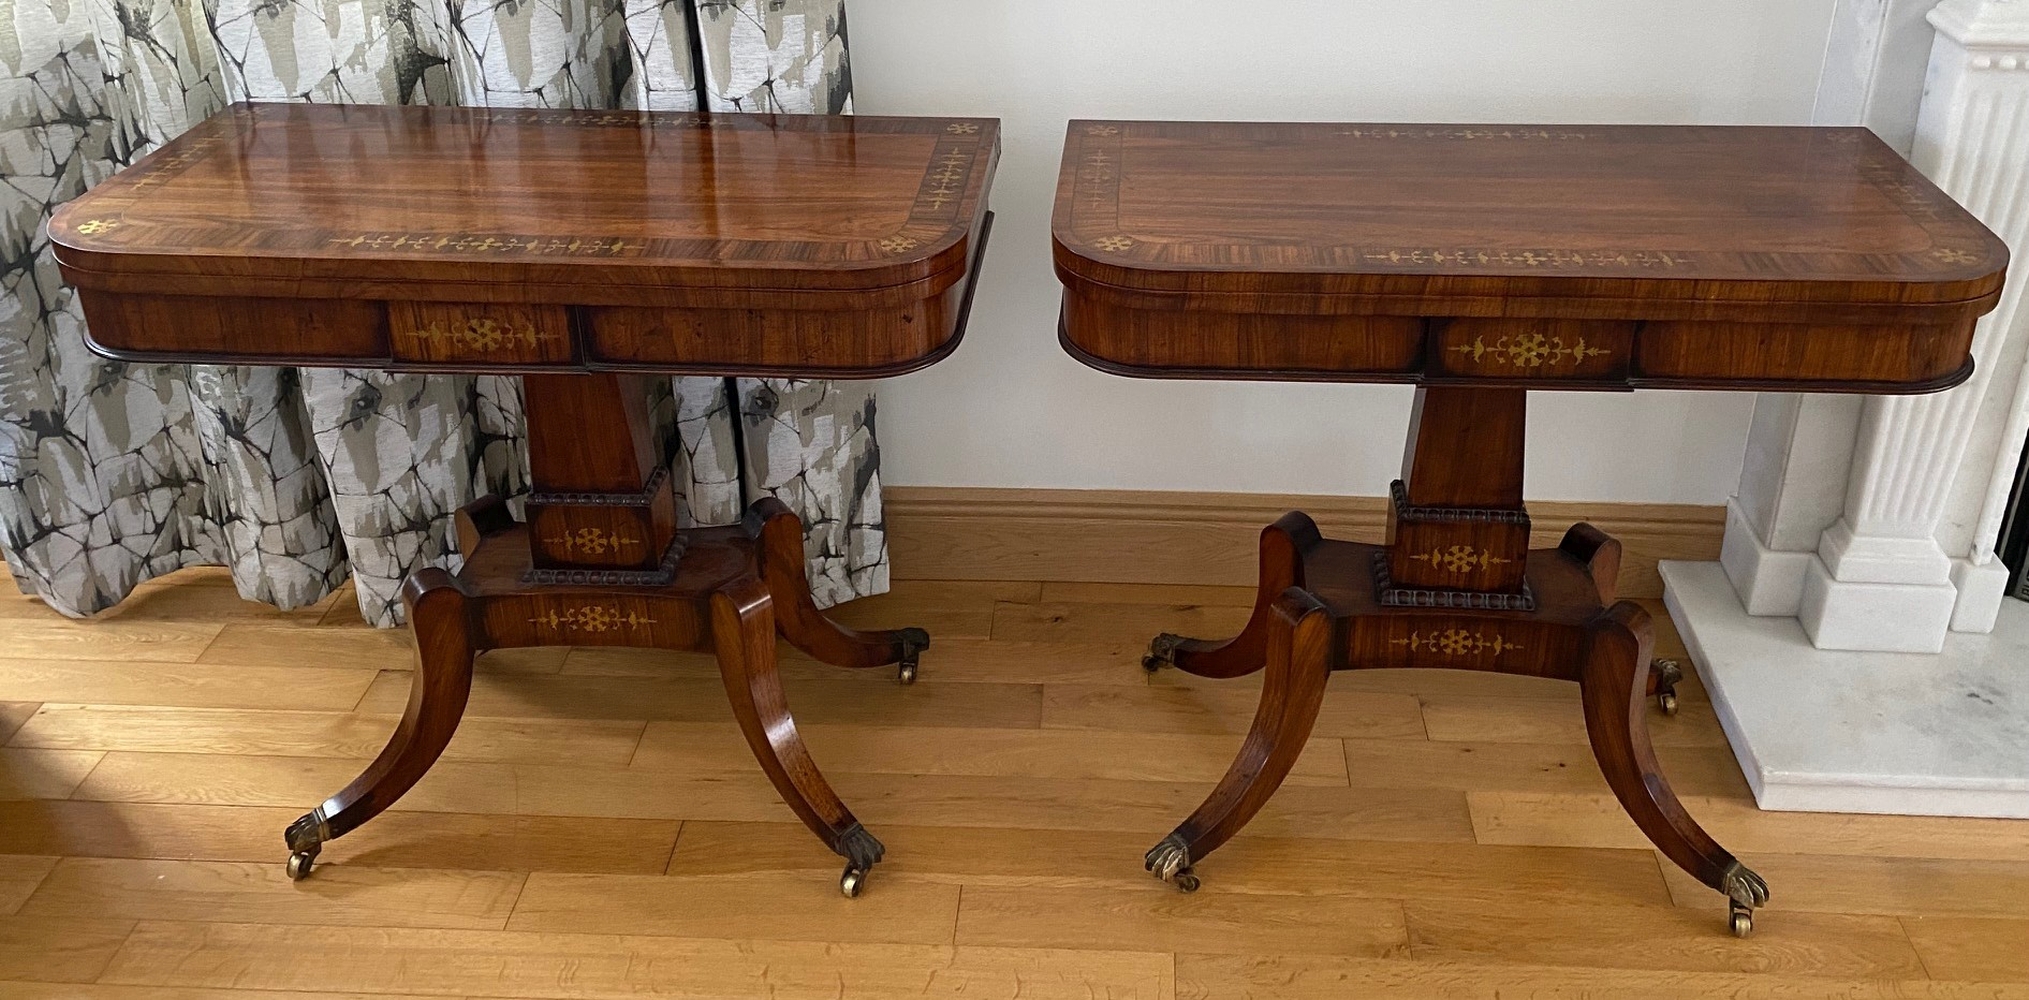 A VERY FINE PAIR OF FOLD OVER ROSEWOOD CARD TABLES, each with brass inlaid decoration, the tops open